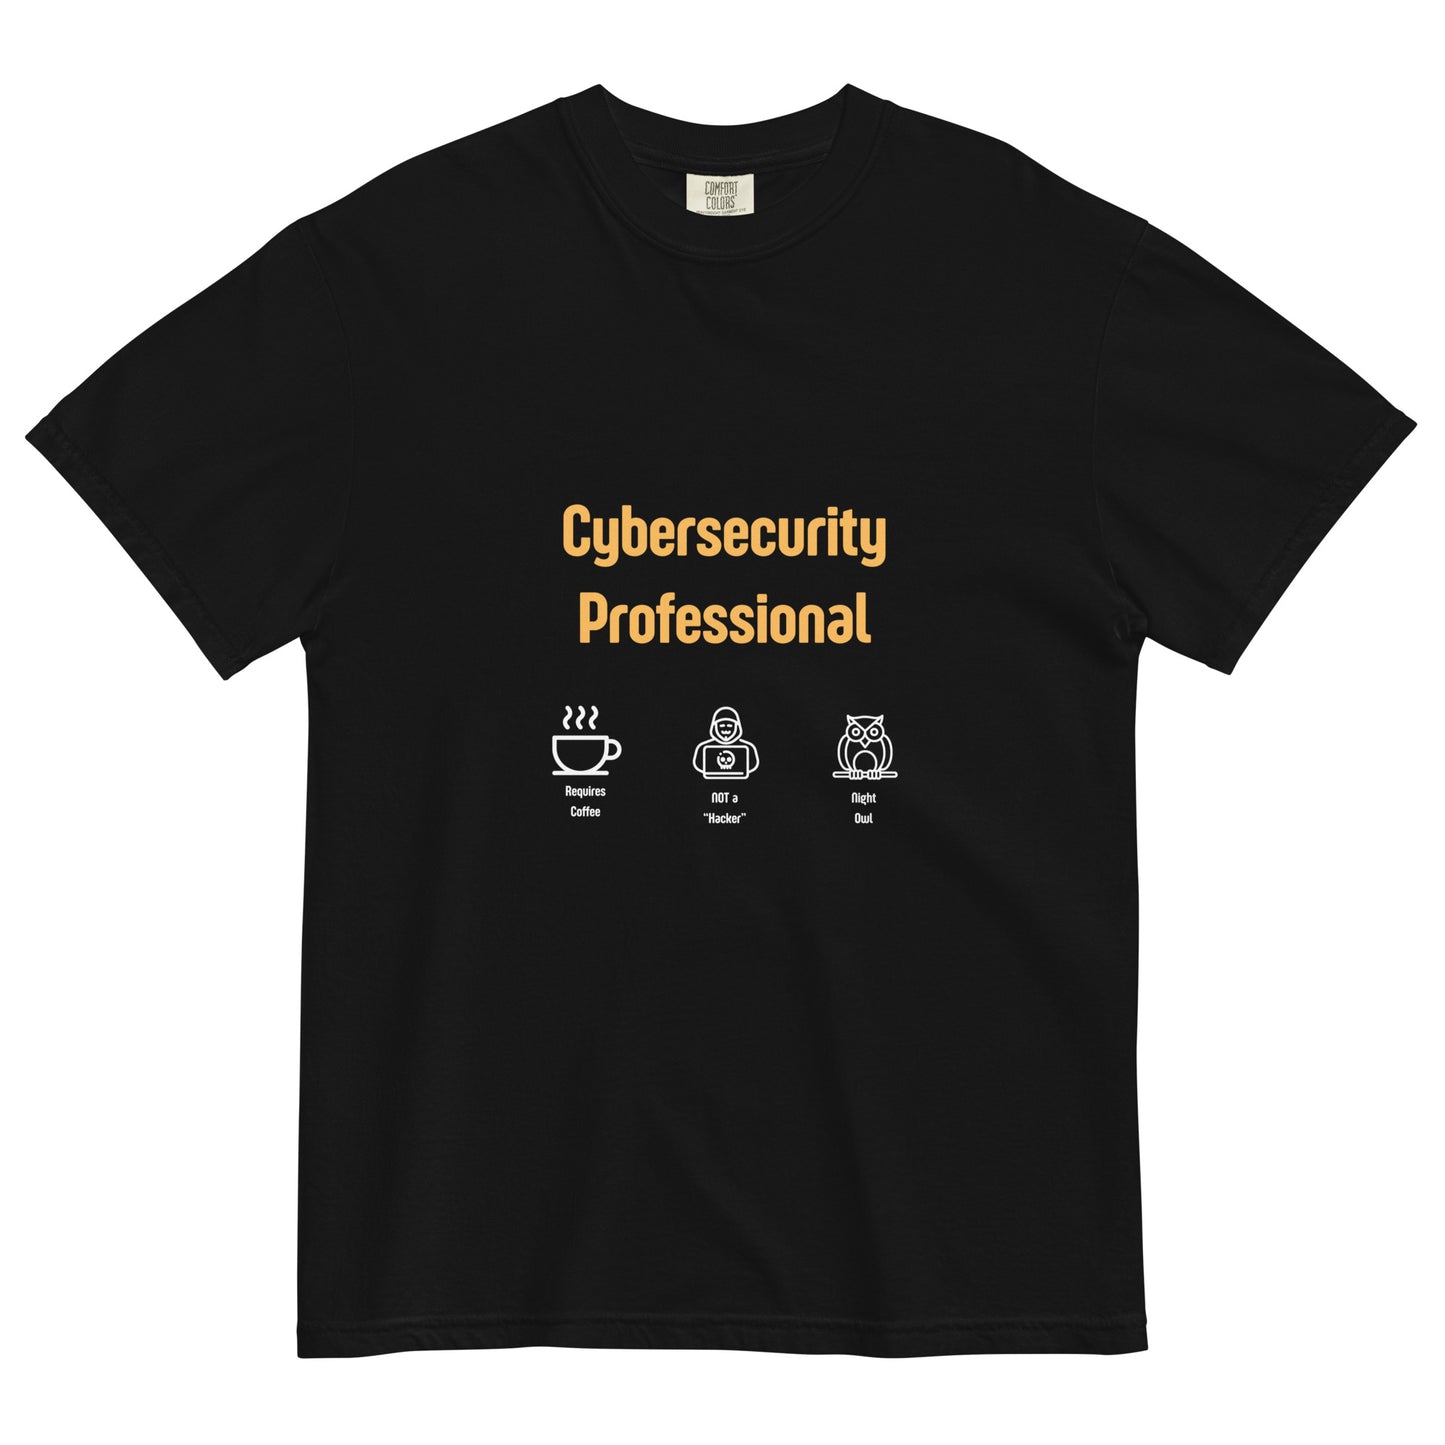 Cyber Security Professional 2 T-Shirt